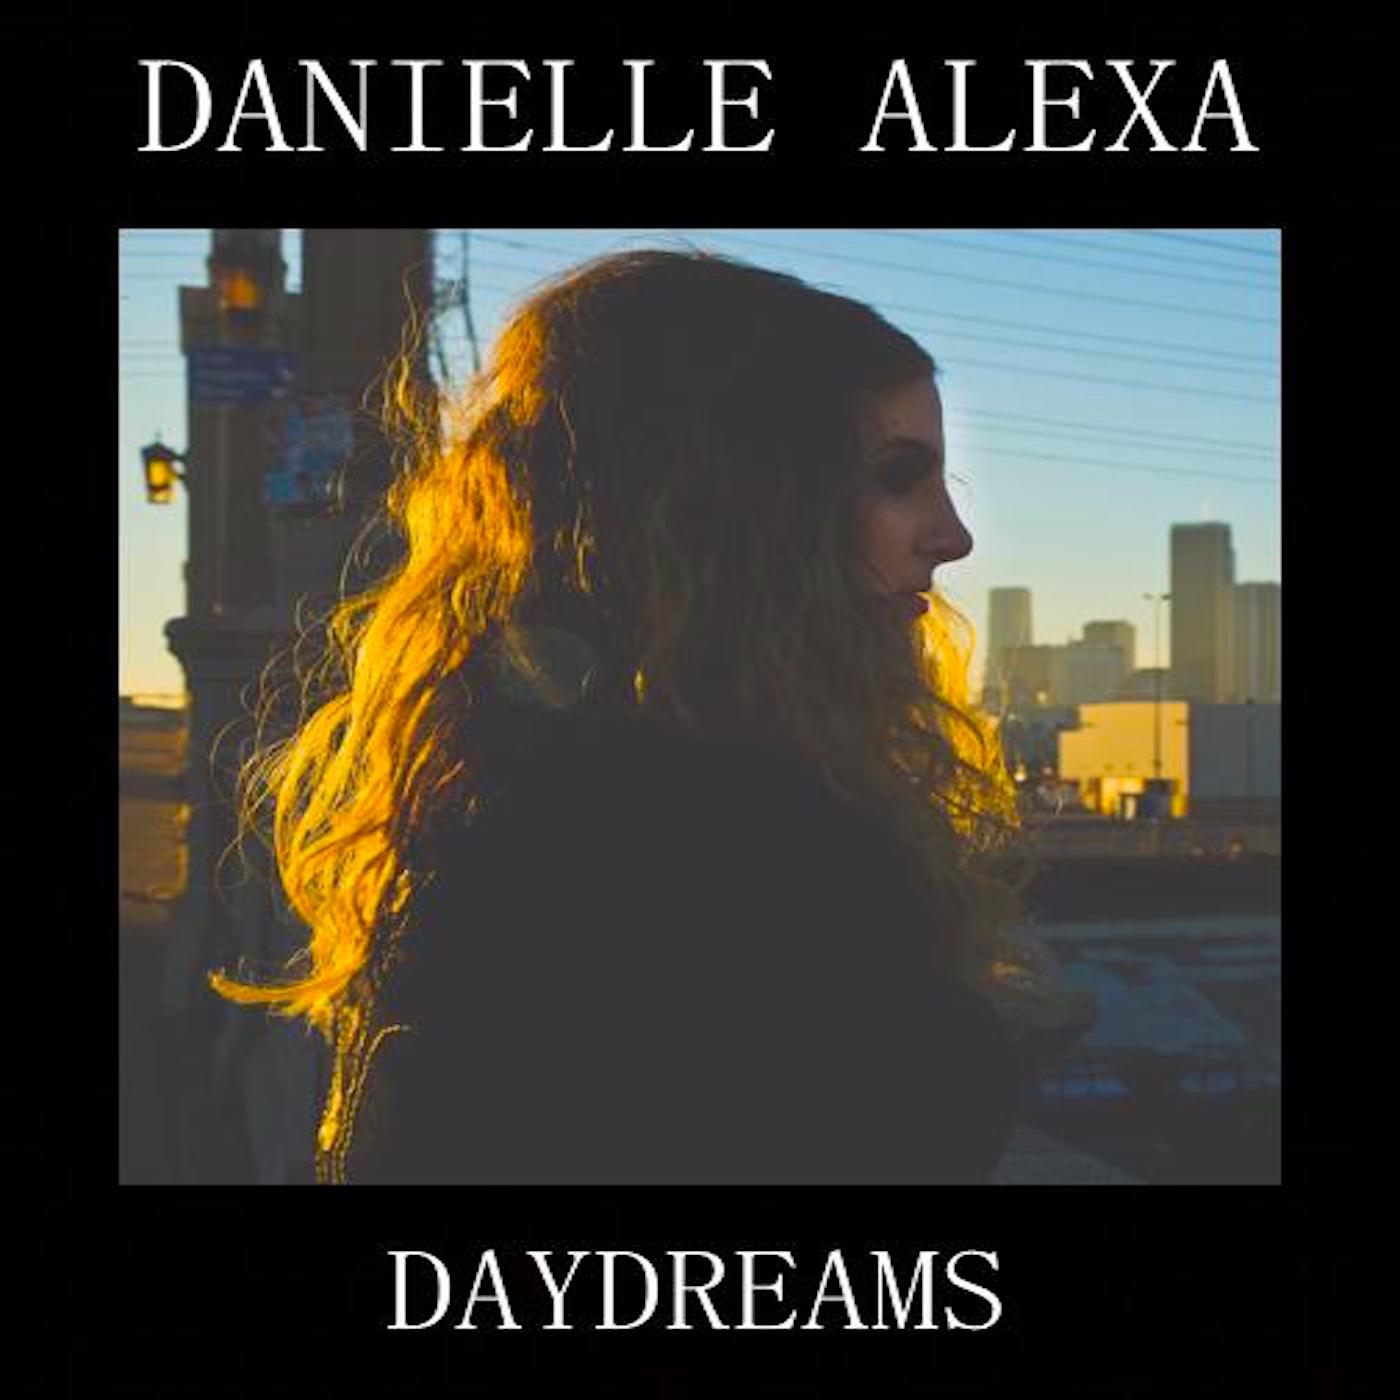 Music & More: Danielle Alexa - Daydreams, Single and Video Out Now, A Powerful New ...1400 x 1400